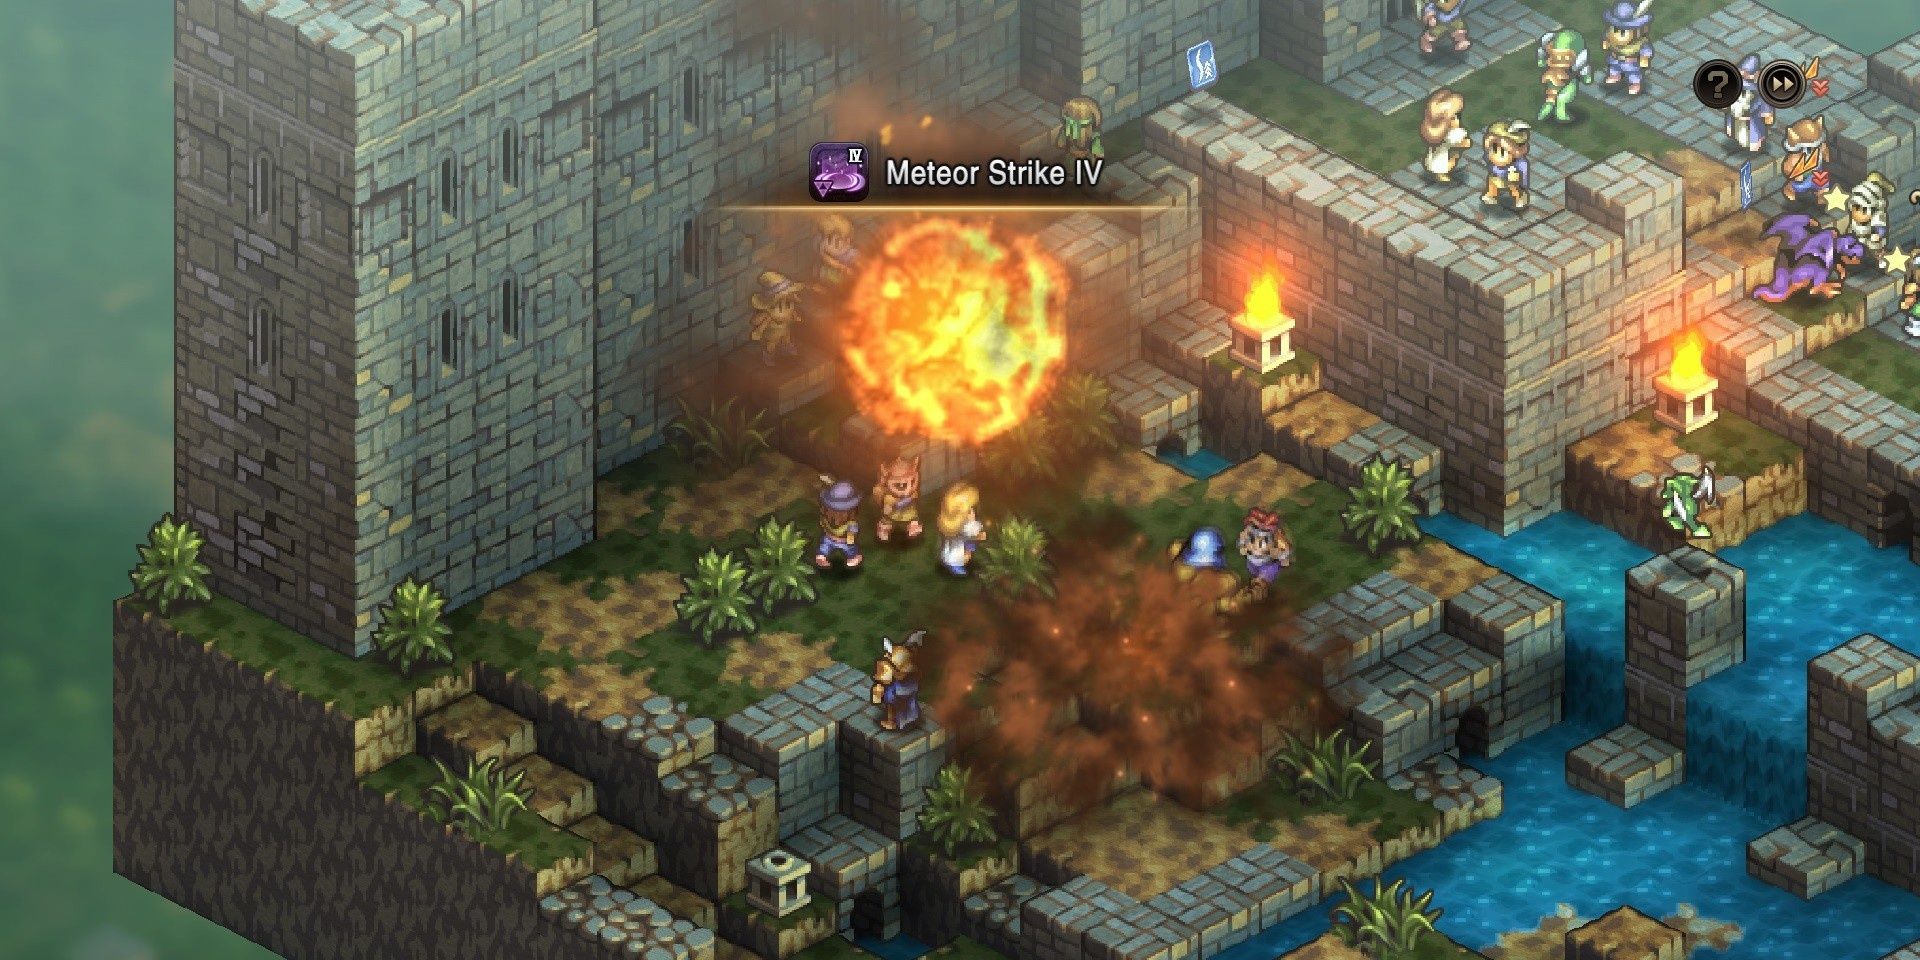 A Meteor Strike raining down on party members during a battle in Tactics Ogre: Reborn